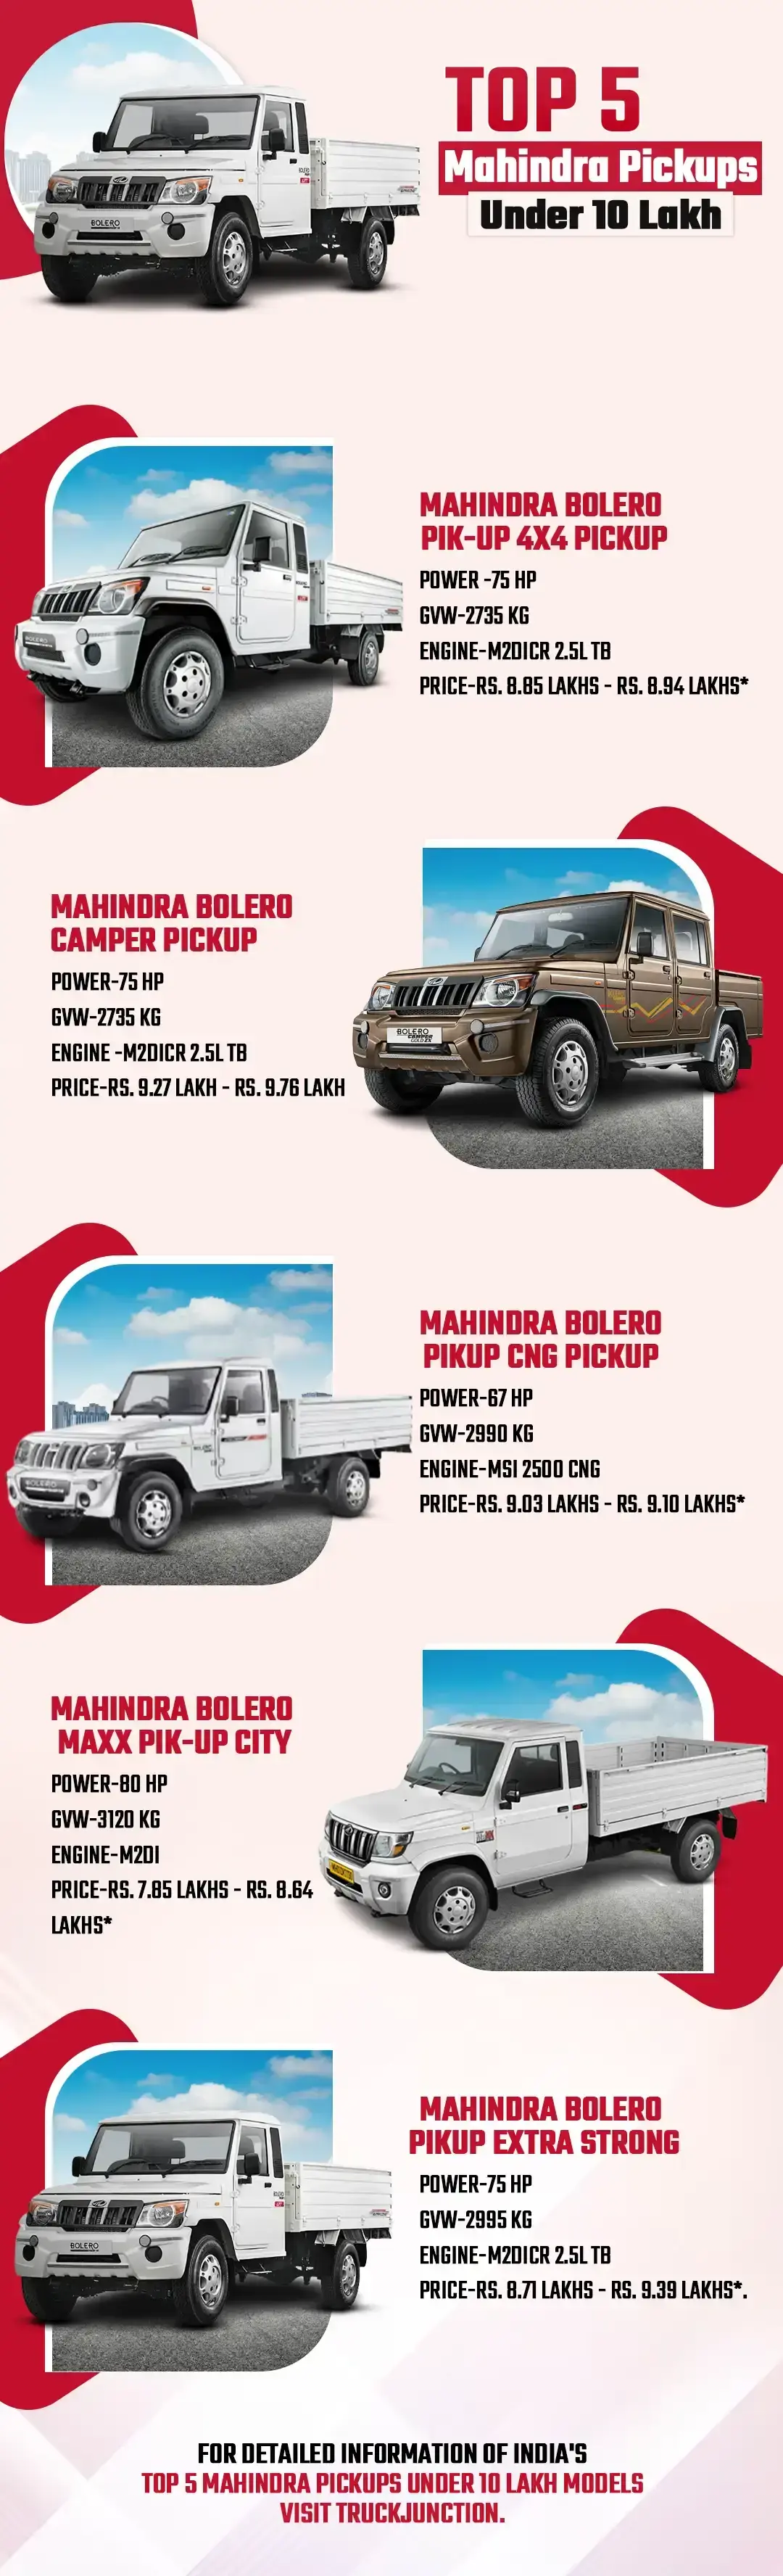 Top 5 Mahindra Pickups Under 10 Lakh Infographic